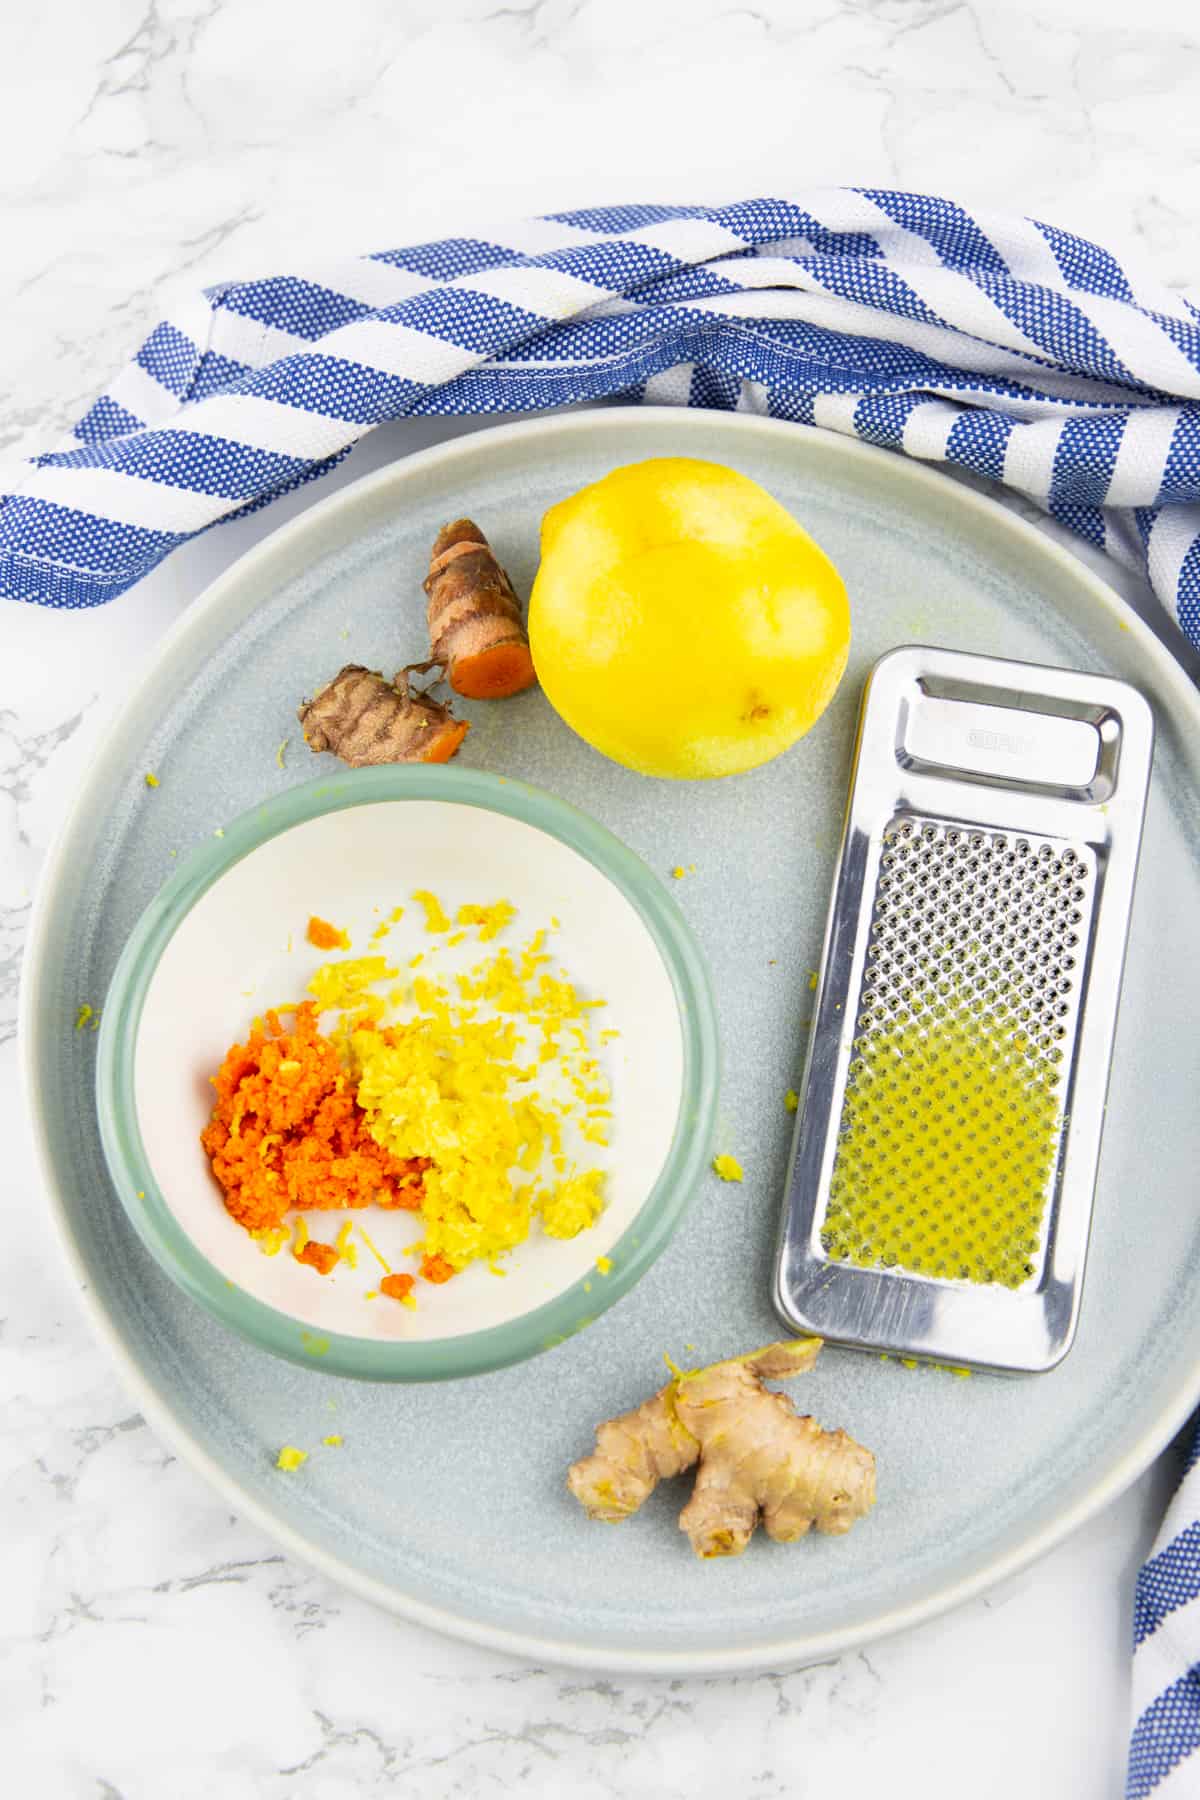 lemon, fresh ginger, and turmeric on a grey plate together with a grater 